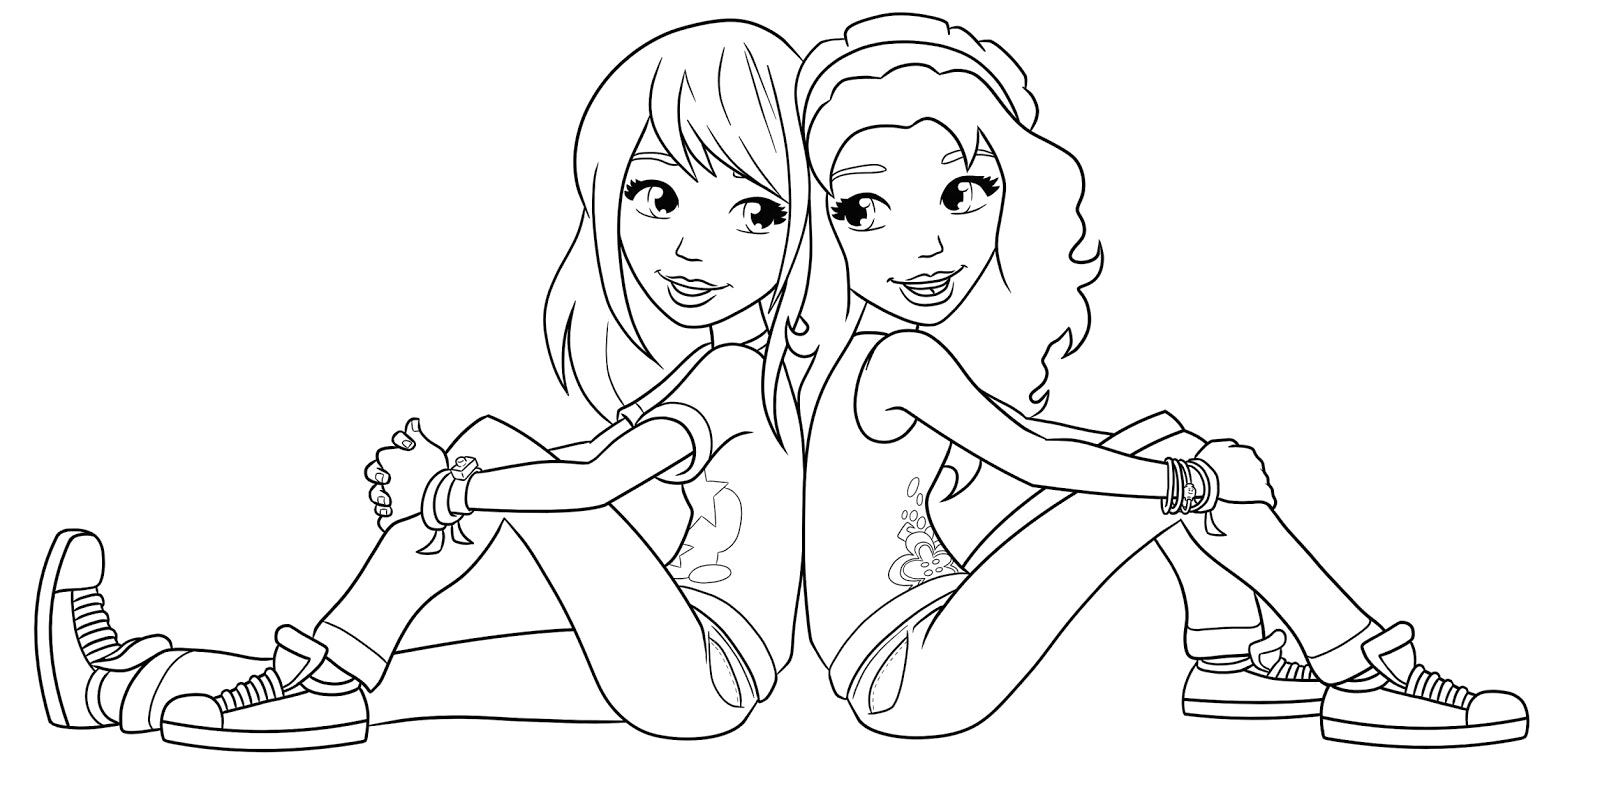 Two Best Friends Coloring Pages at GetDrawings Free download